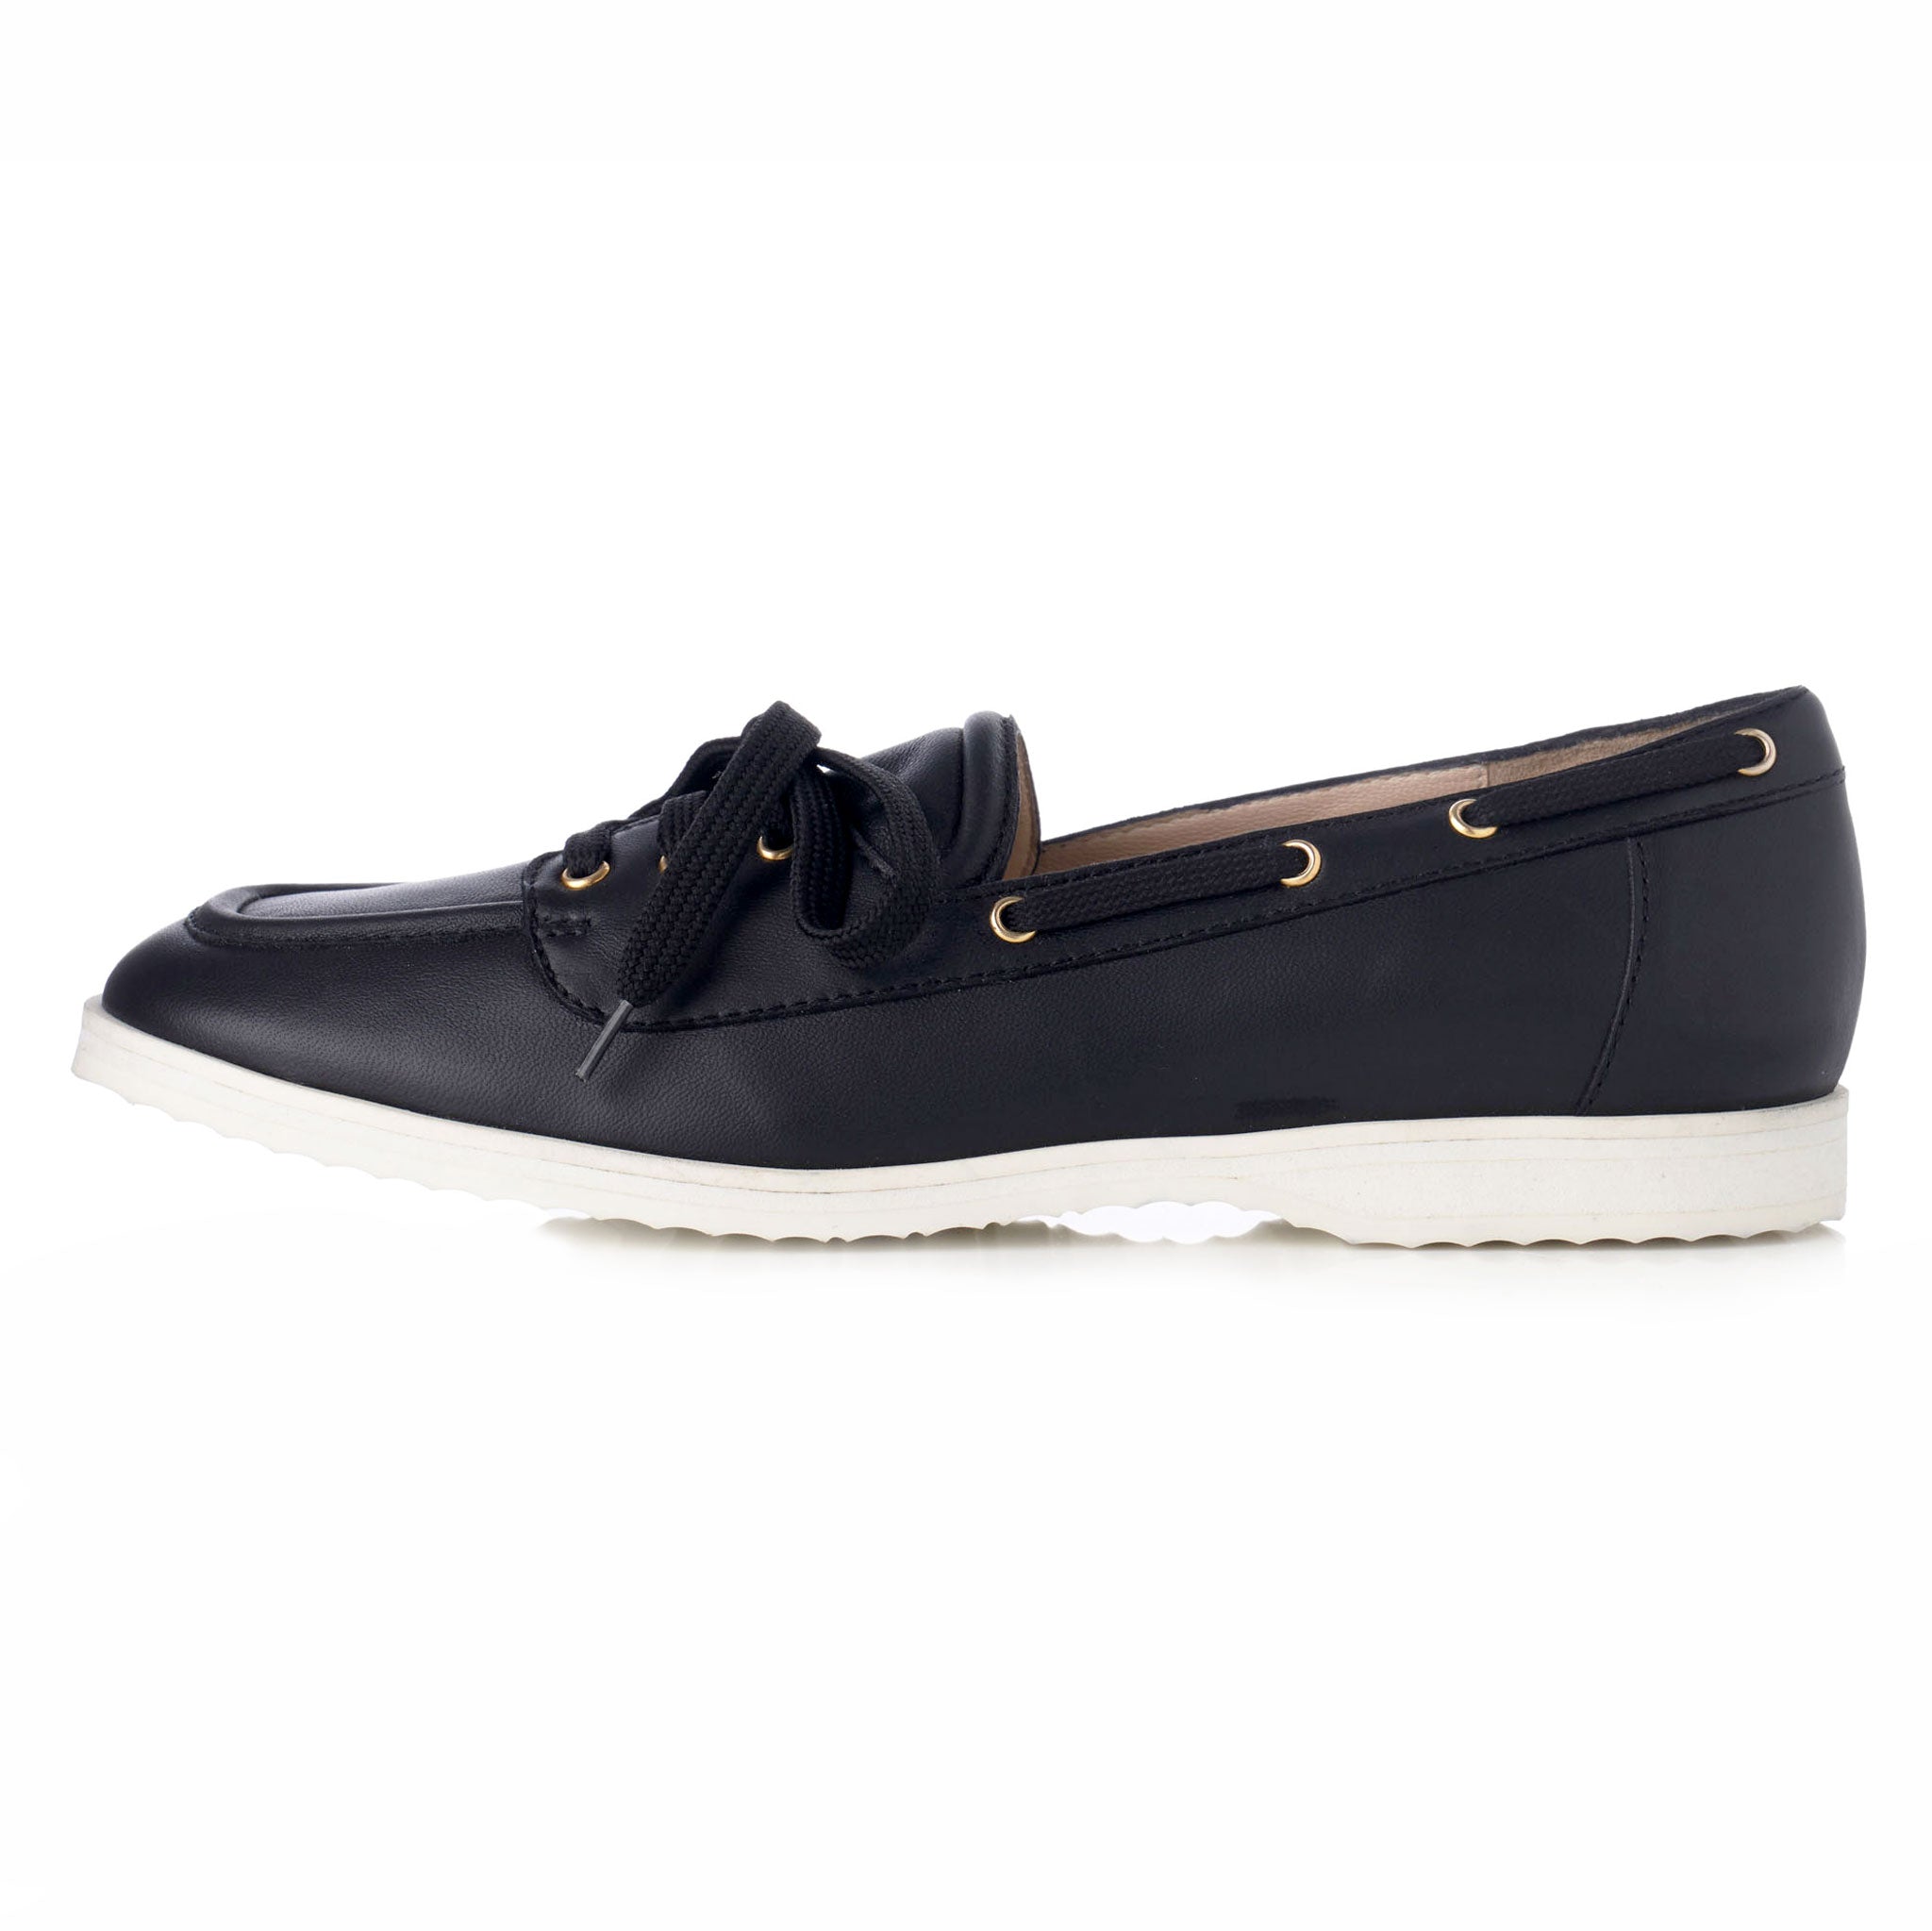 black slip on leather shoes for women with decorative laces and white sole